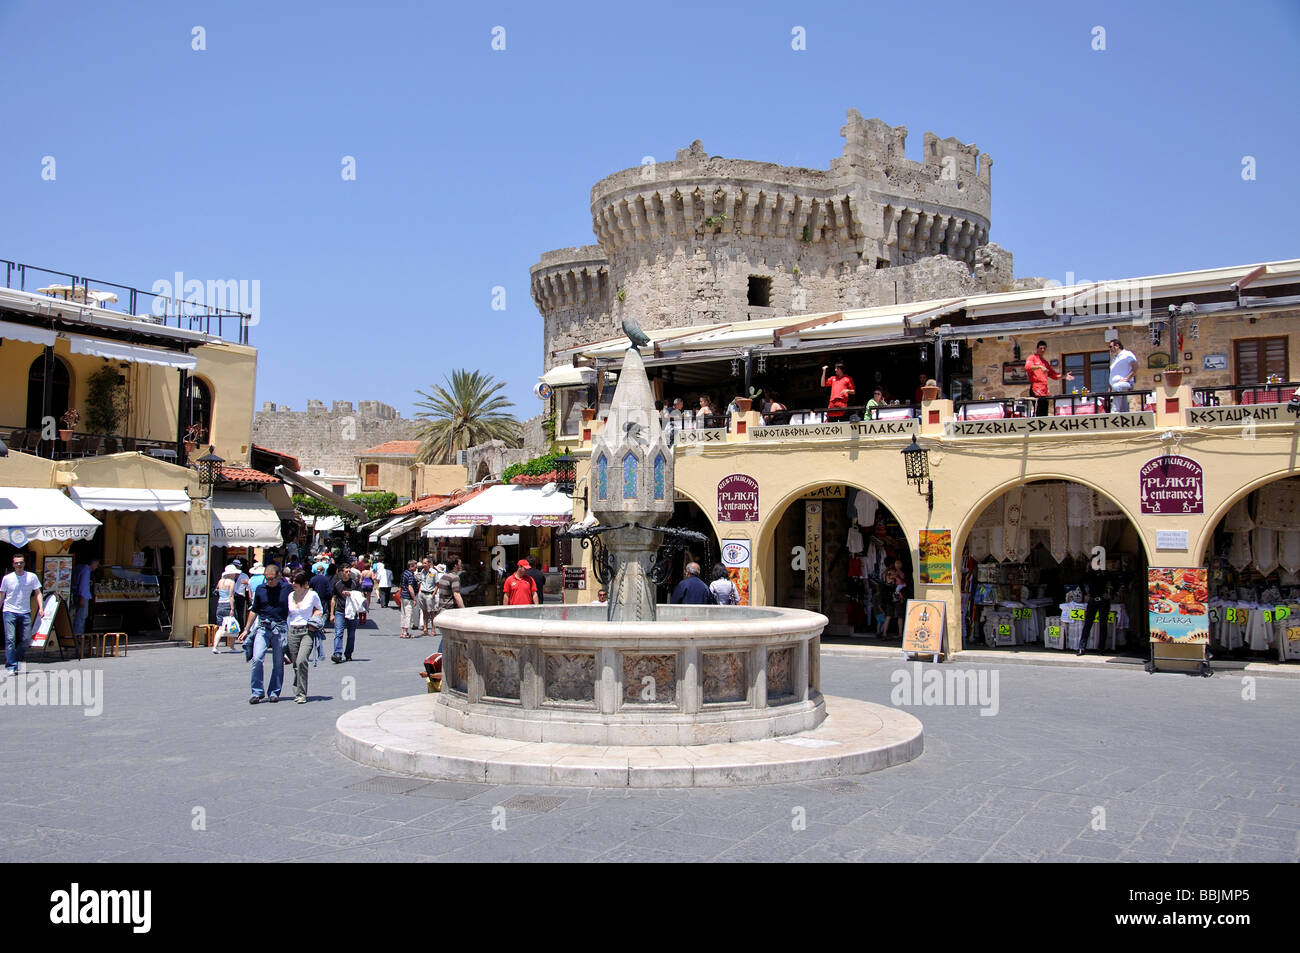 Castellania fountain in Ippokratous Square, Old Town, City of Rhodes, Rhodes (Rodos), Dodecanese, South Aegean Region, Greece Stock Photo